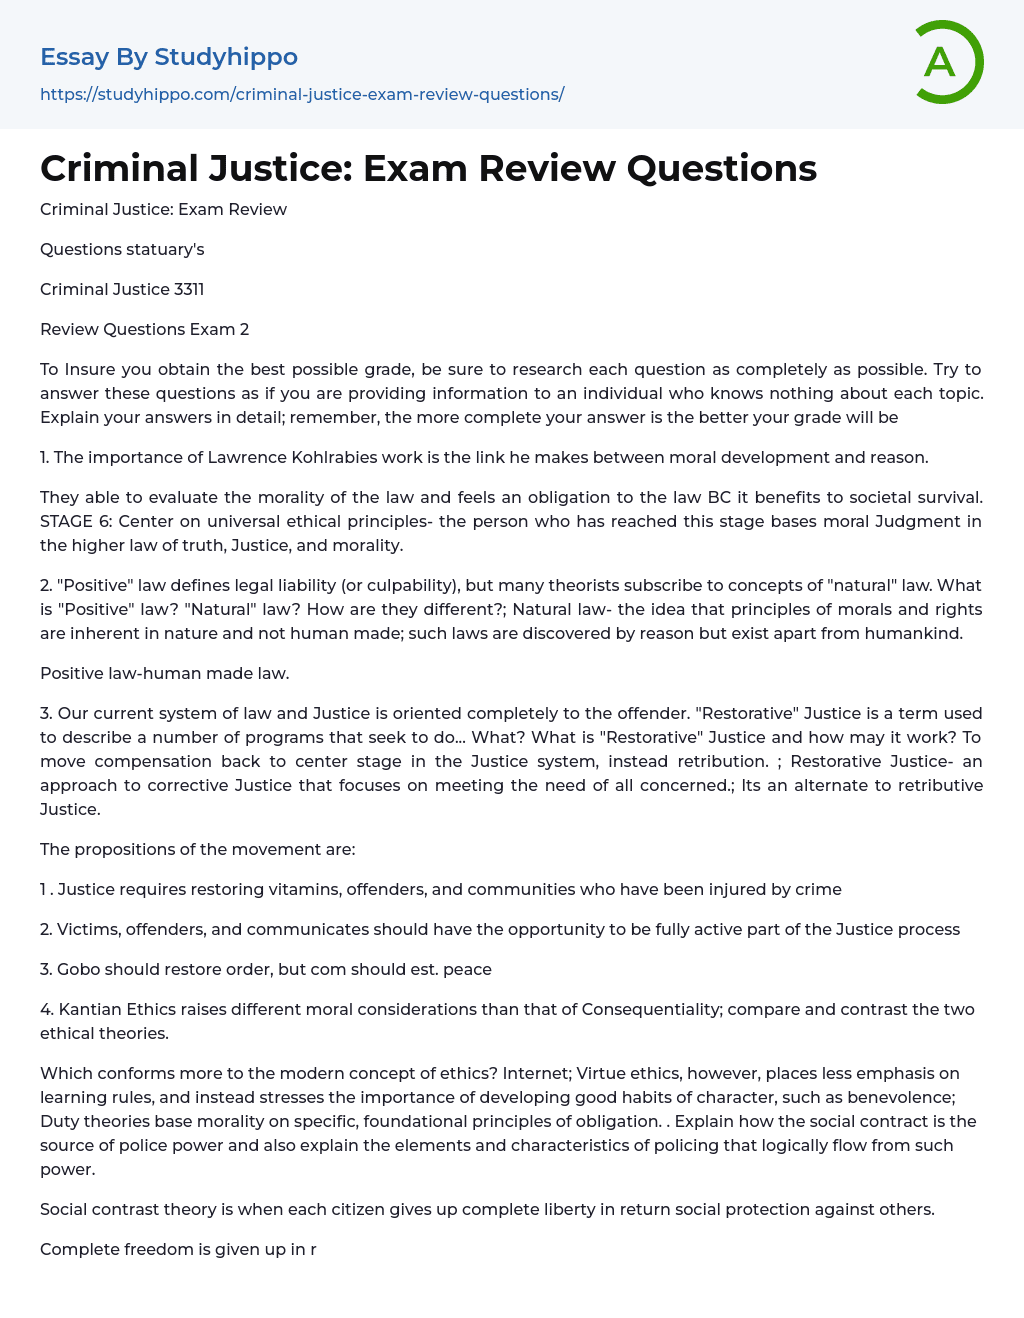 Criminal Justice: Exam Review Questions Essay Example